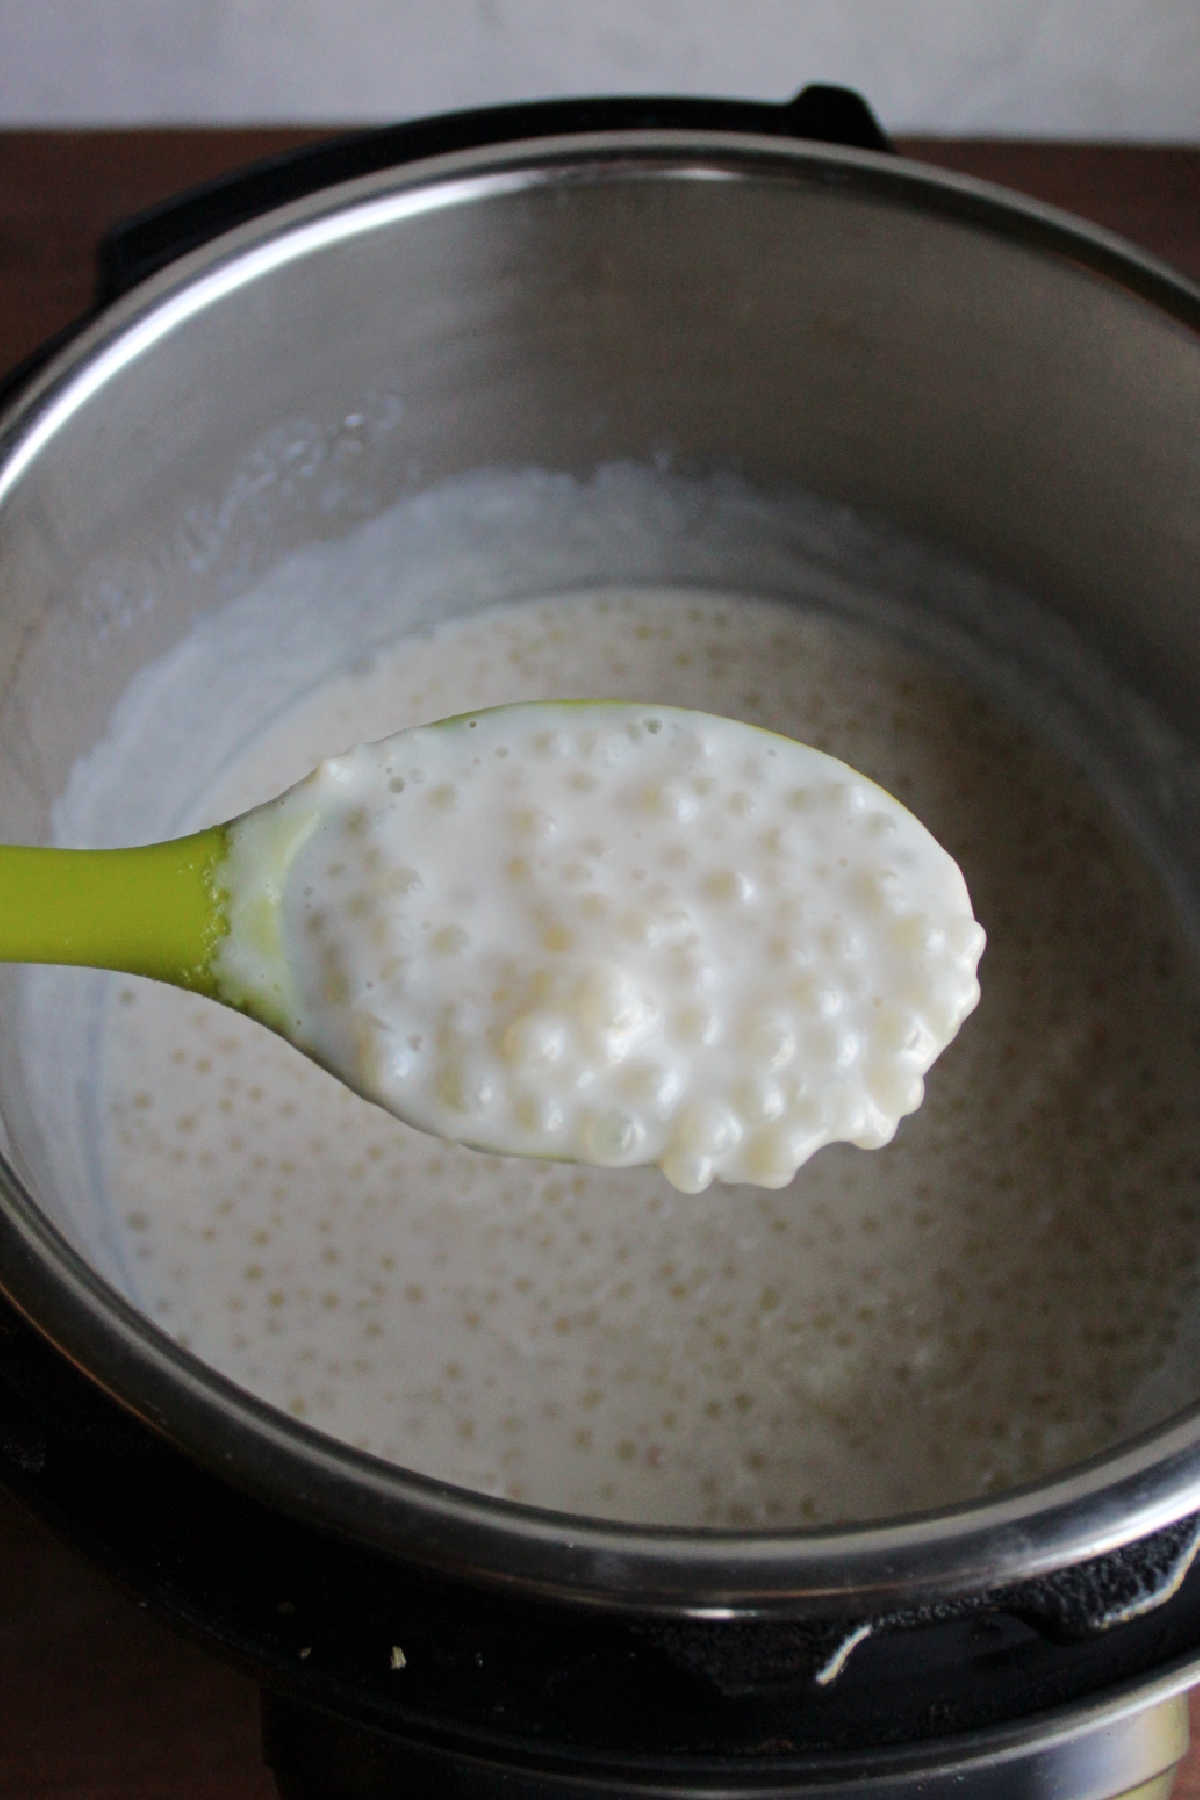 Large spoon with a scoop of warm tapioca over the instant pot with the remaining tapioca.